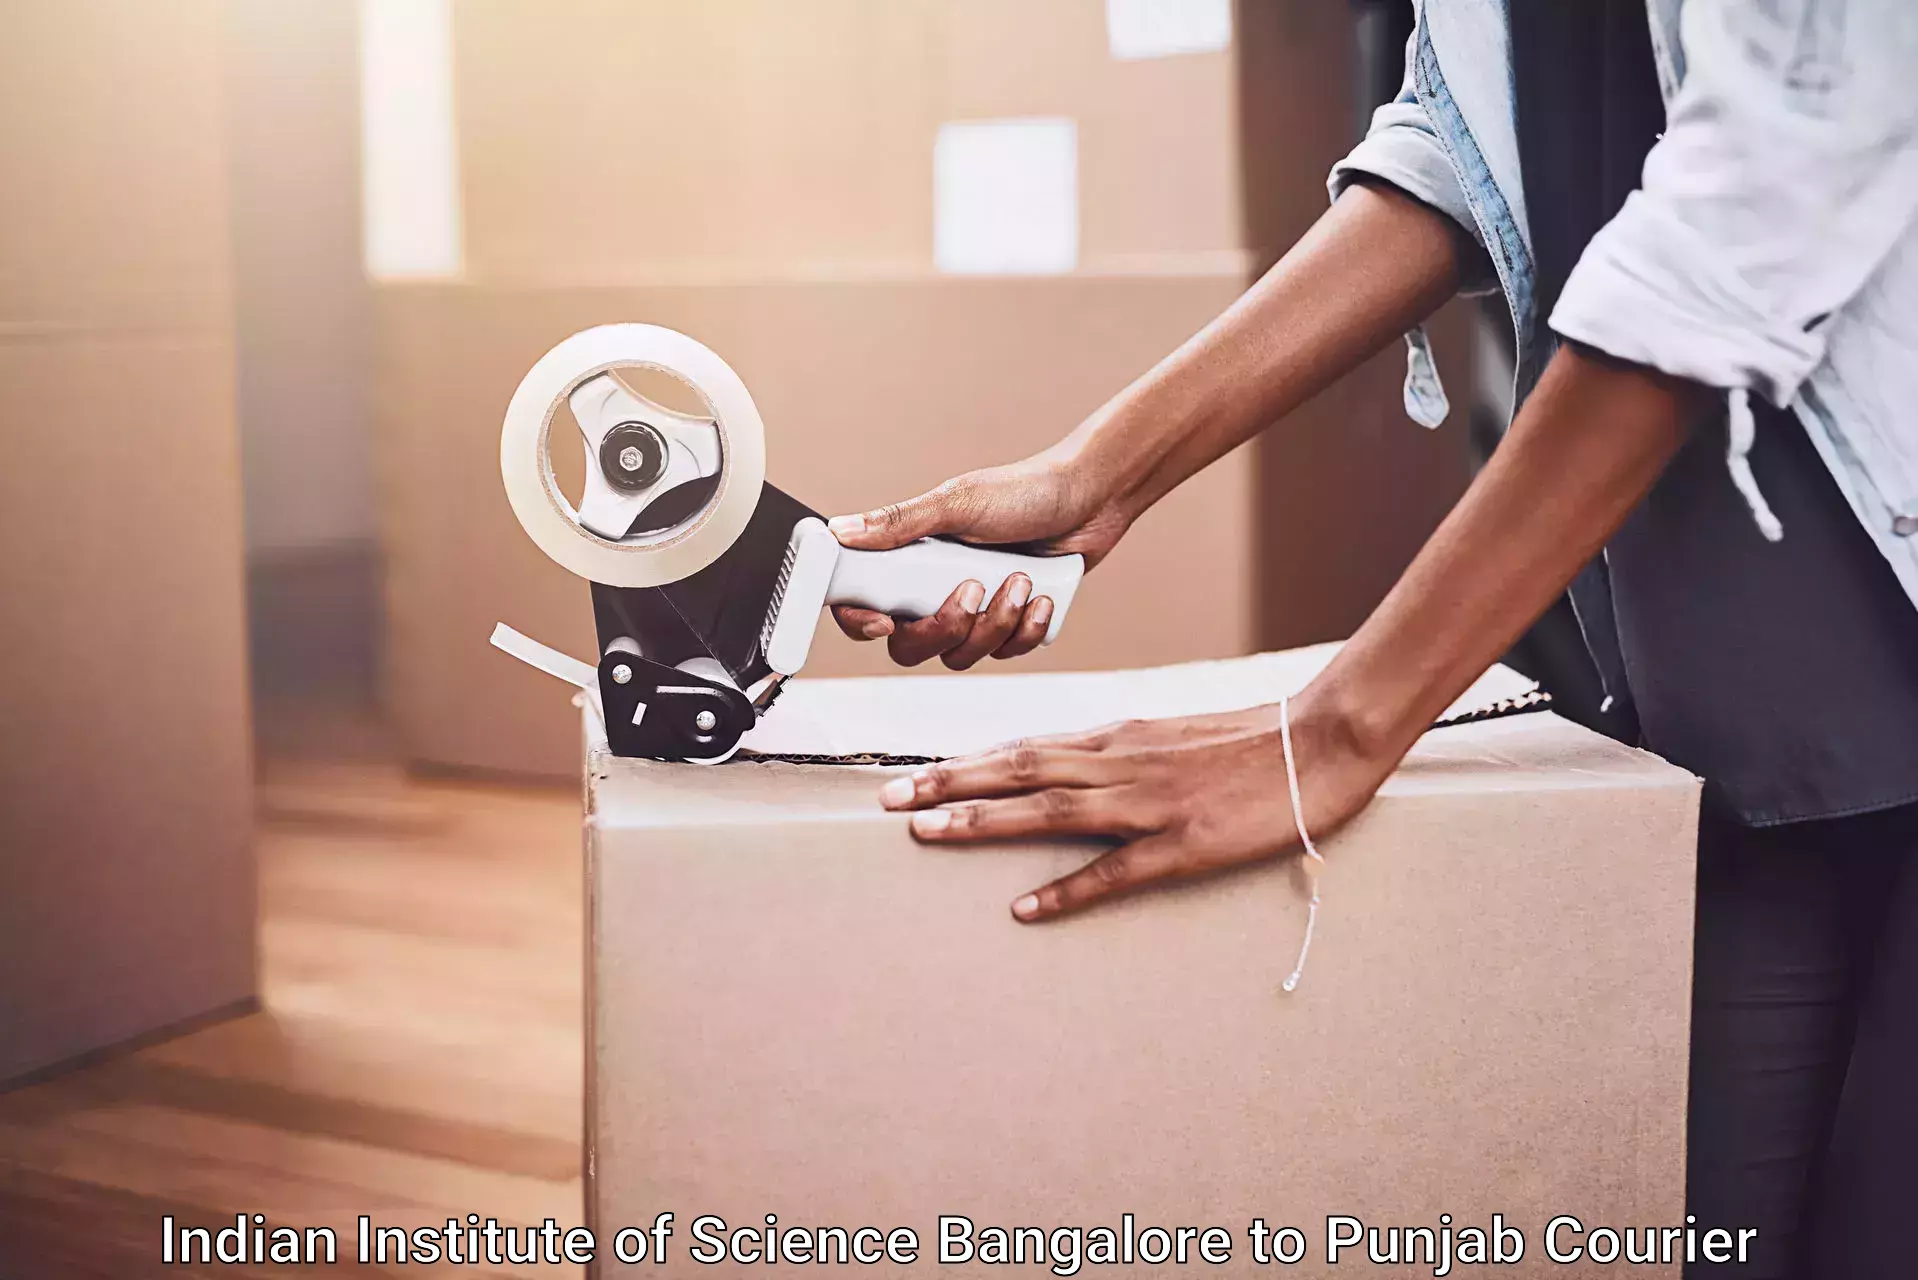 Home moving service Indian Institute of Science Bangalore to Punjab